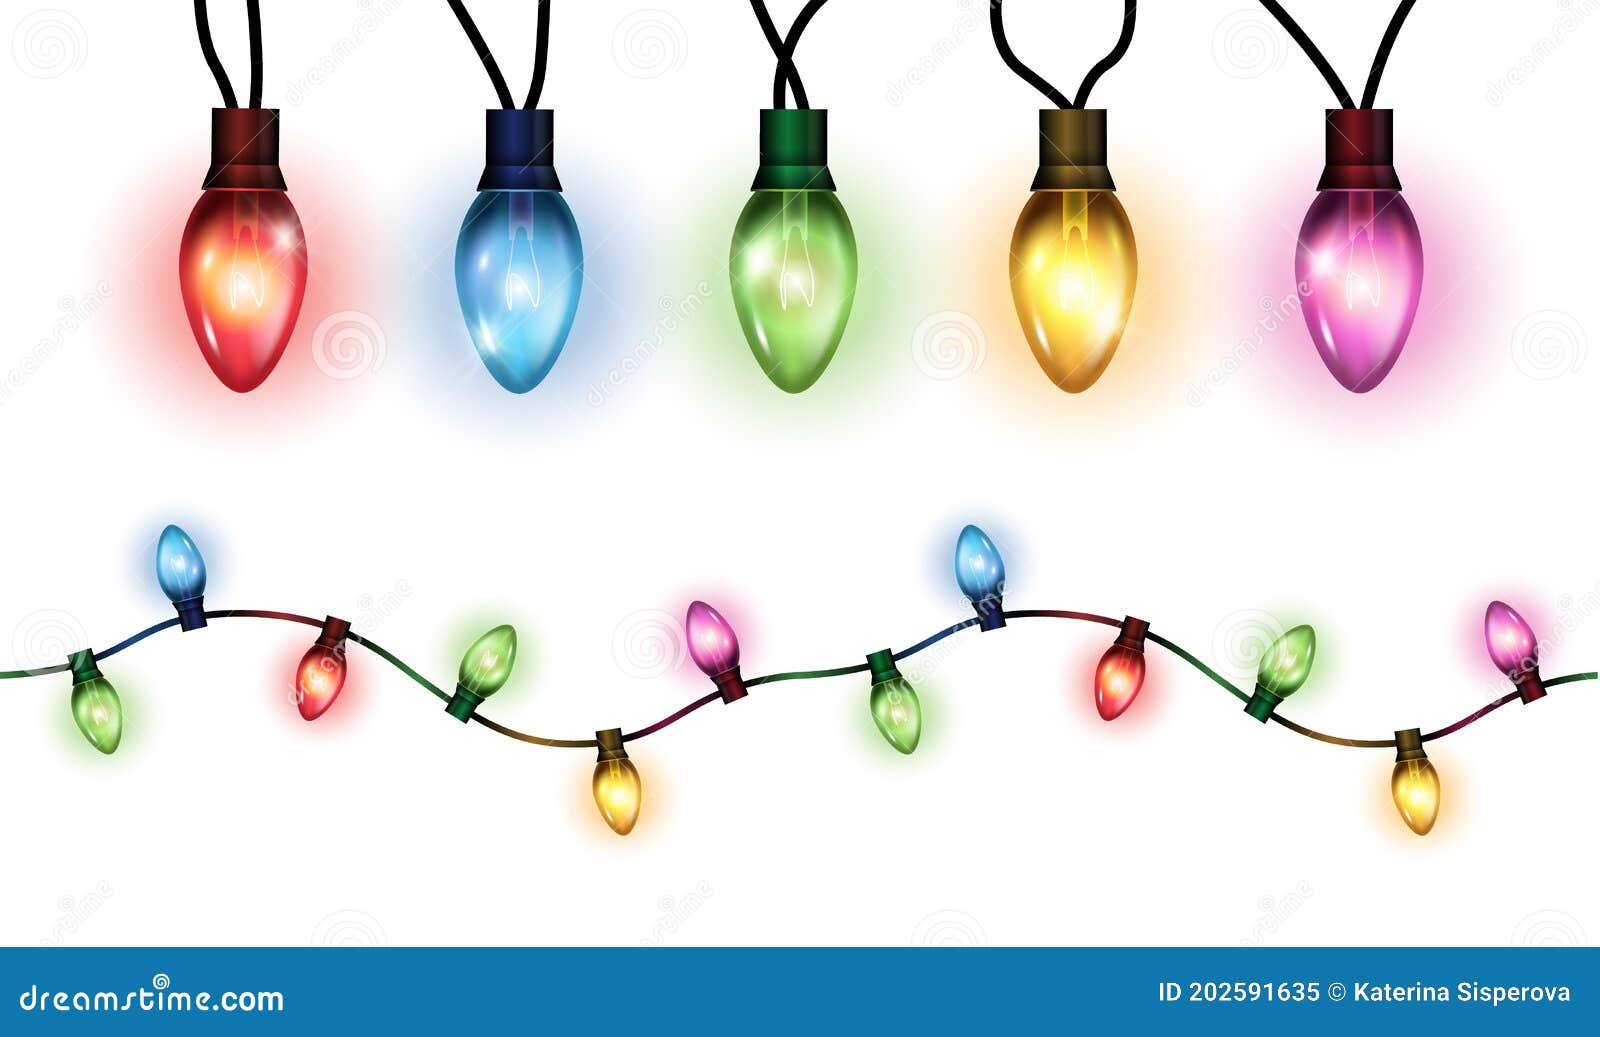  realistic glowing colorful christmas lights in seamless pattern and individual hanging light bulbs  on white backgr